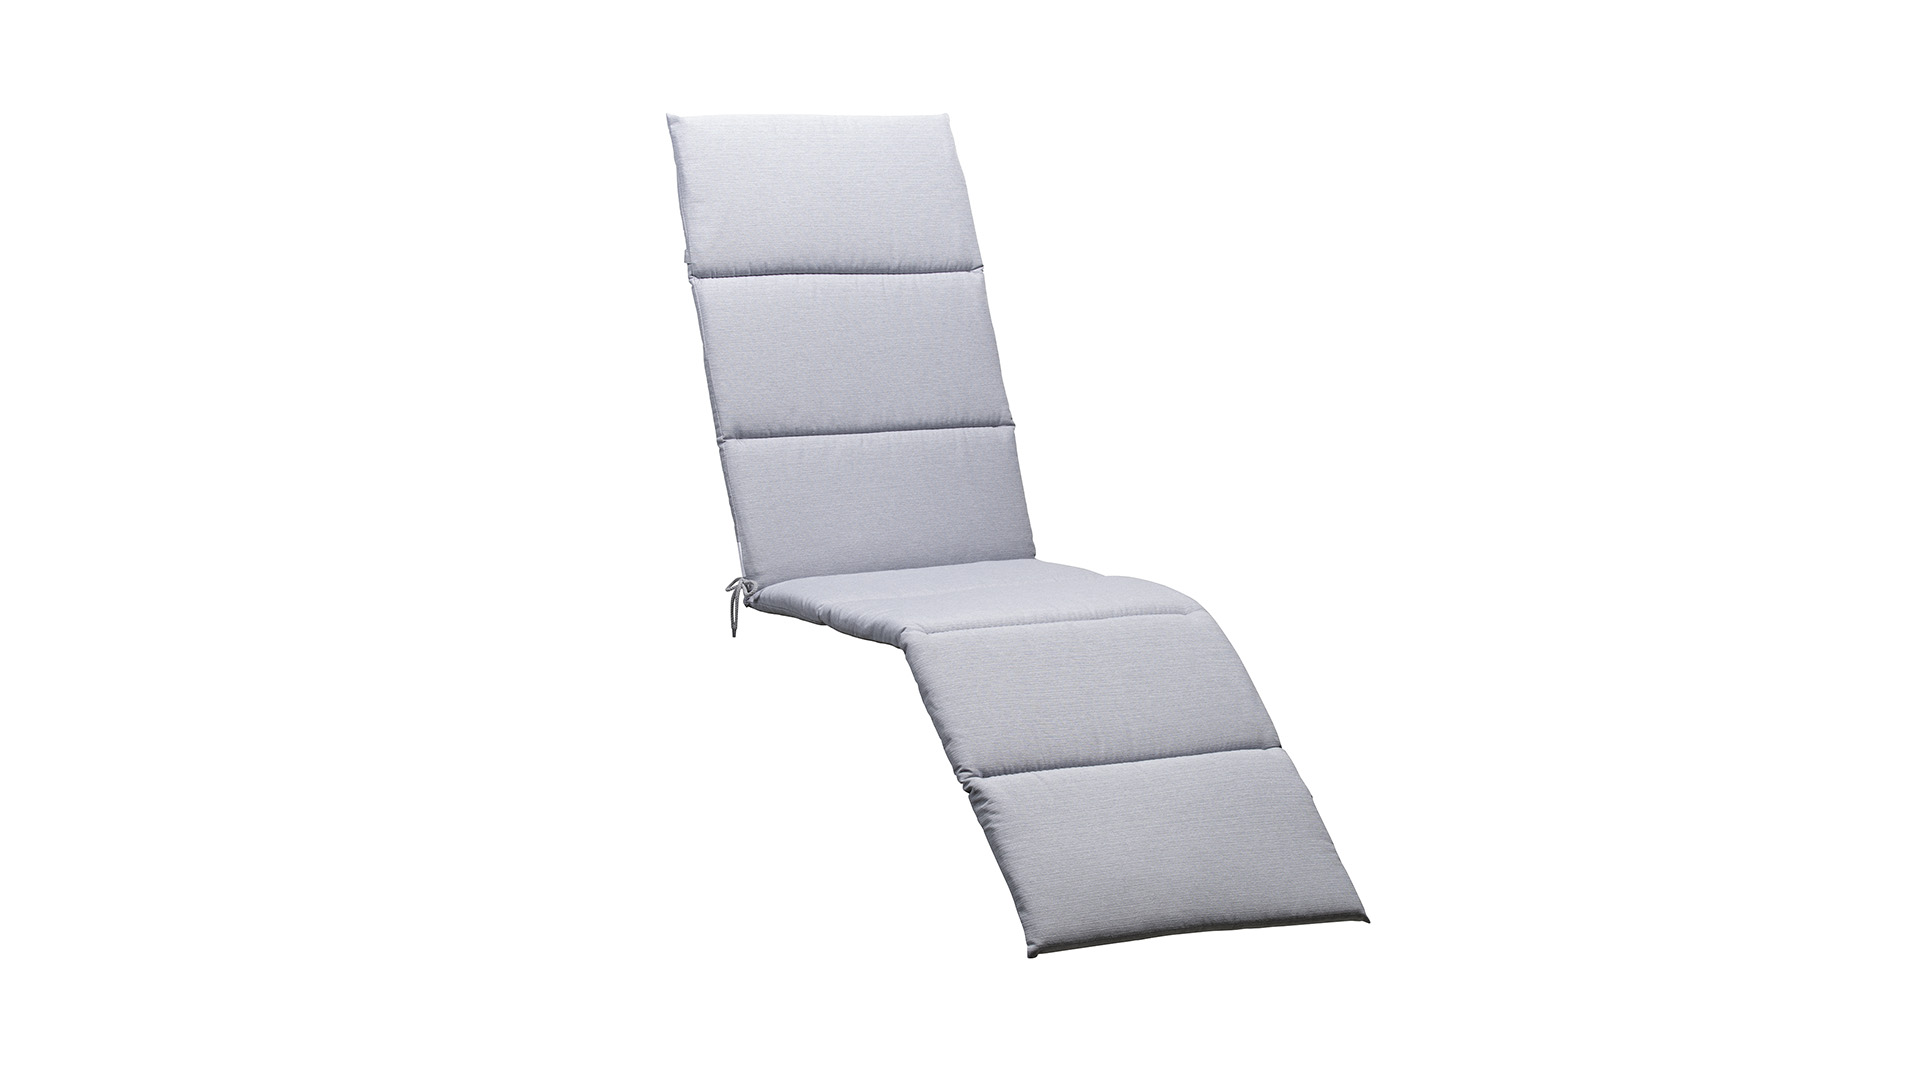 Relax pad 170x48x3 cm, SEE, Design 8009